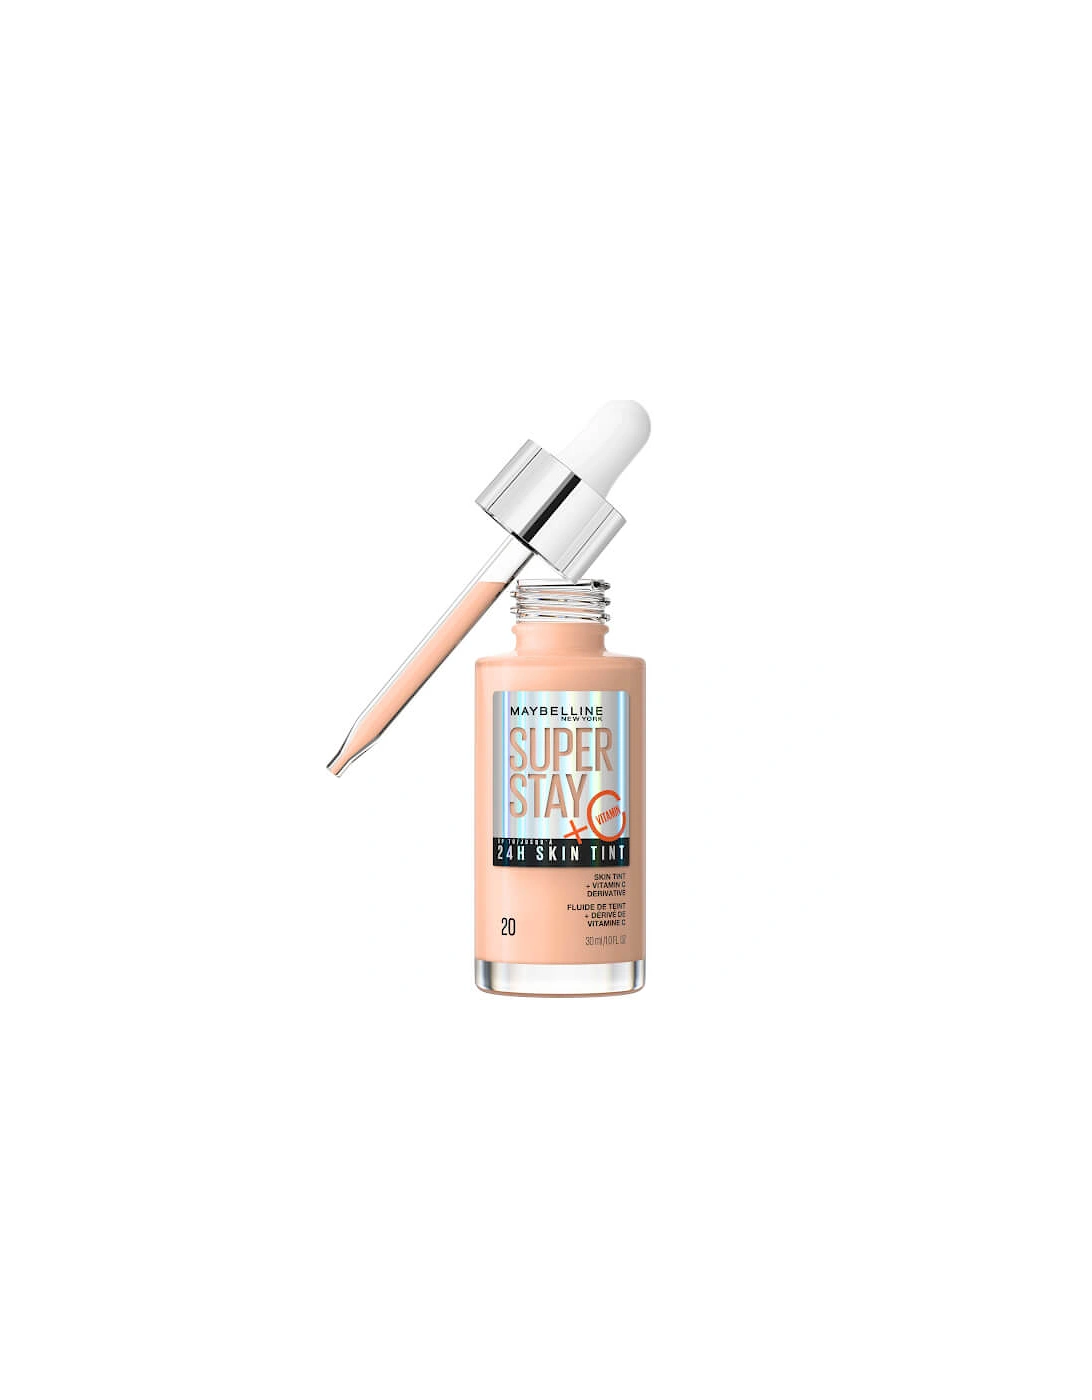 Super Stay up to 24H Skin Tint Foundation + Vitamin C - Shade 20, 2 of 1